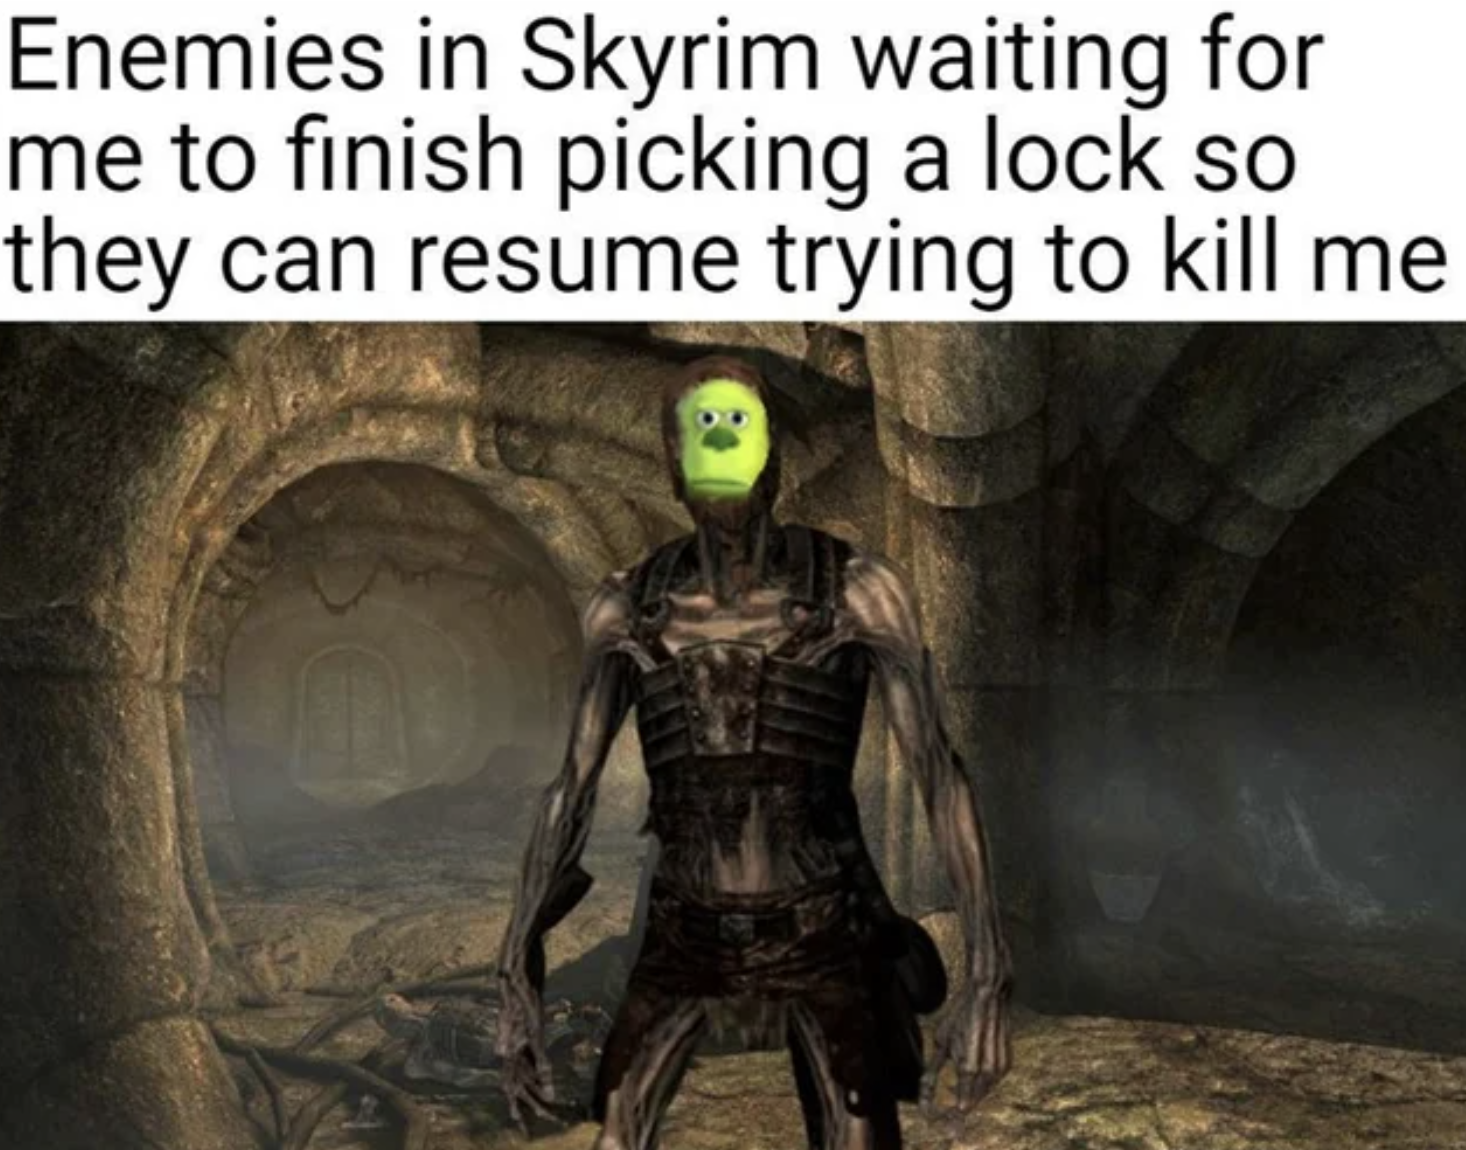 Gaming Memes - fictional character - Enemies in Skyrim waiting for me to finish picking a lock so they can resume trying to kill me